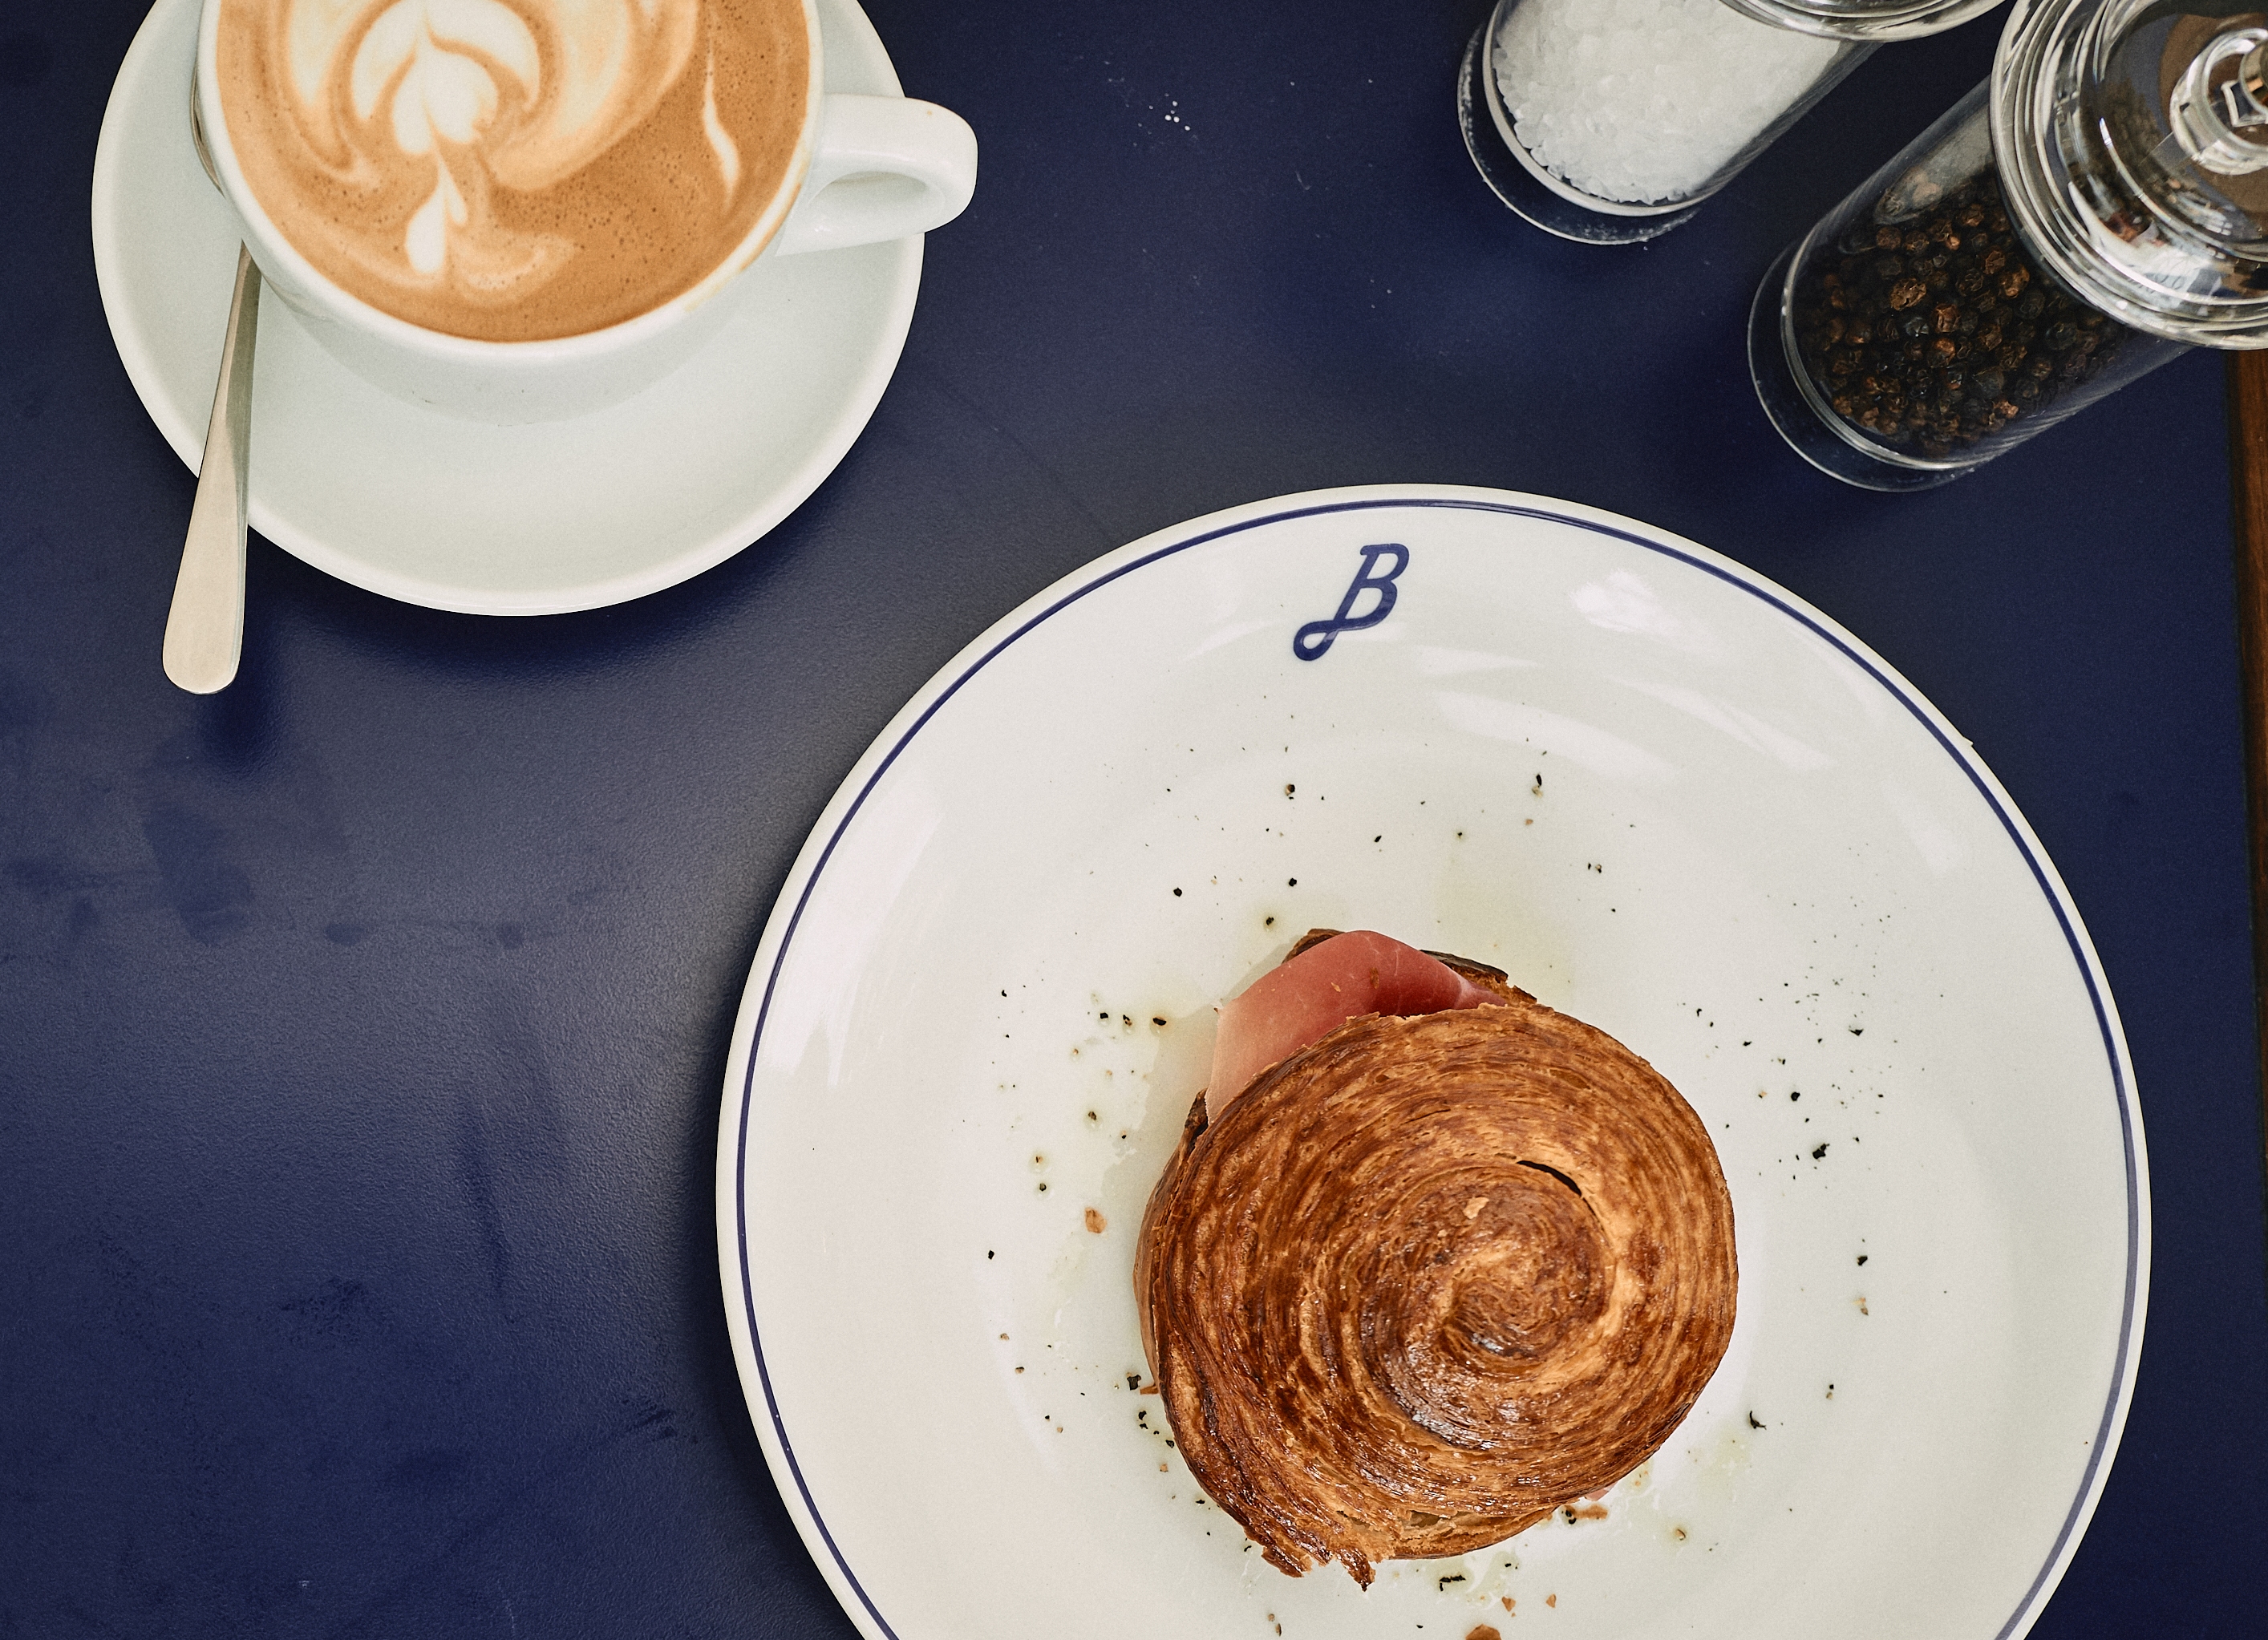 Perfect cappuccino with a croissant filled with Parma Ham: the best way to start the day!